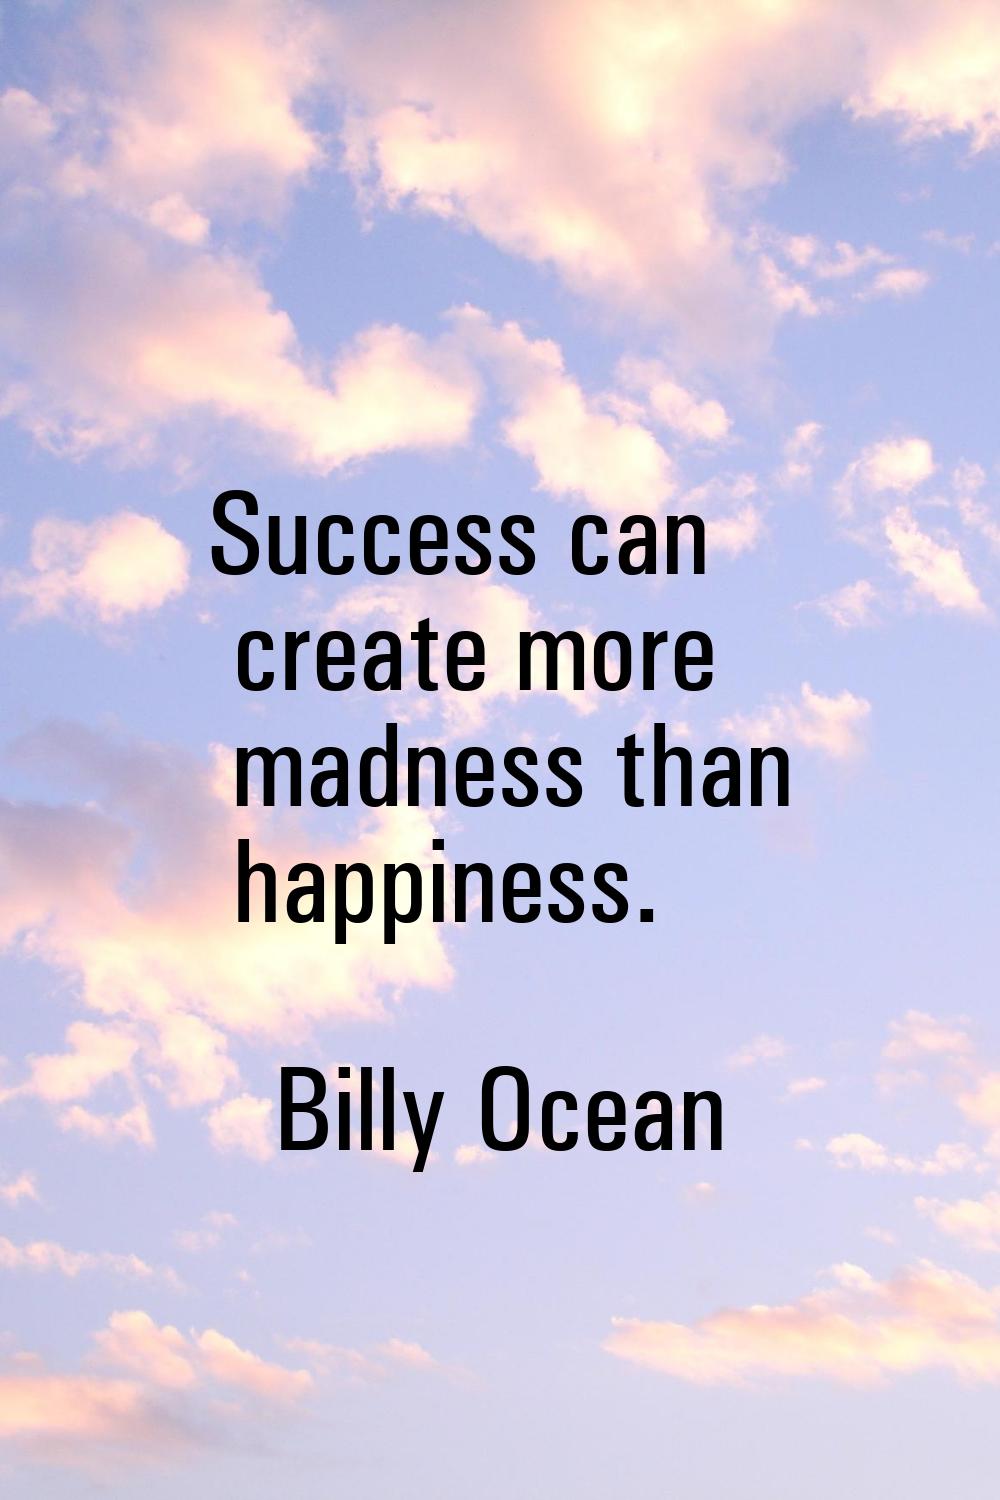 Success can create more madness than happiness.